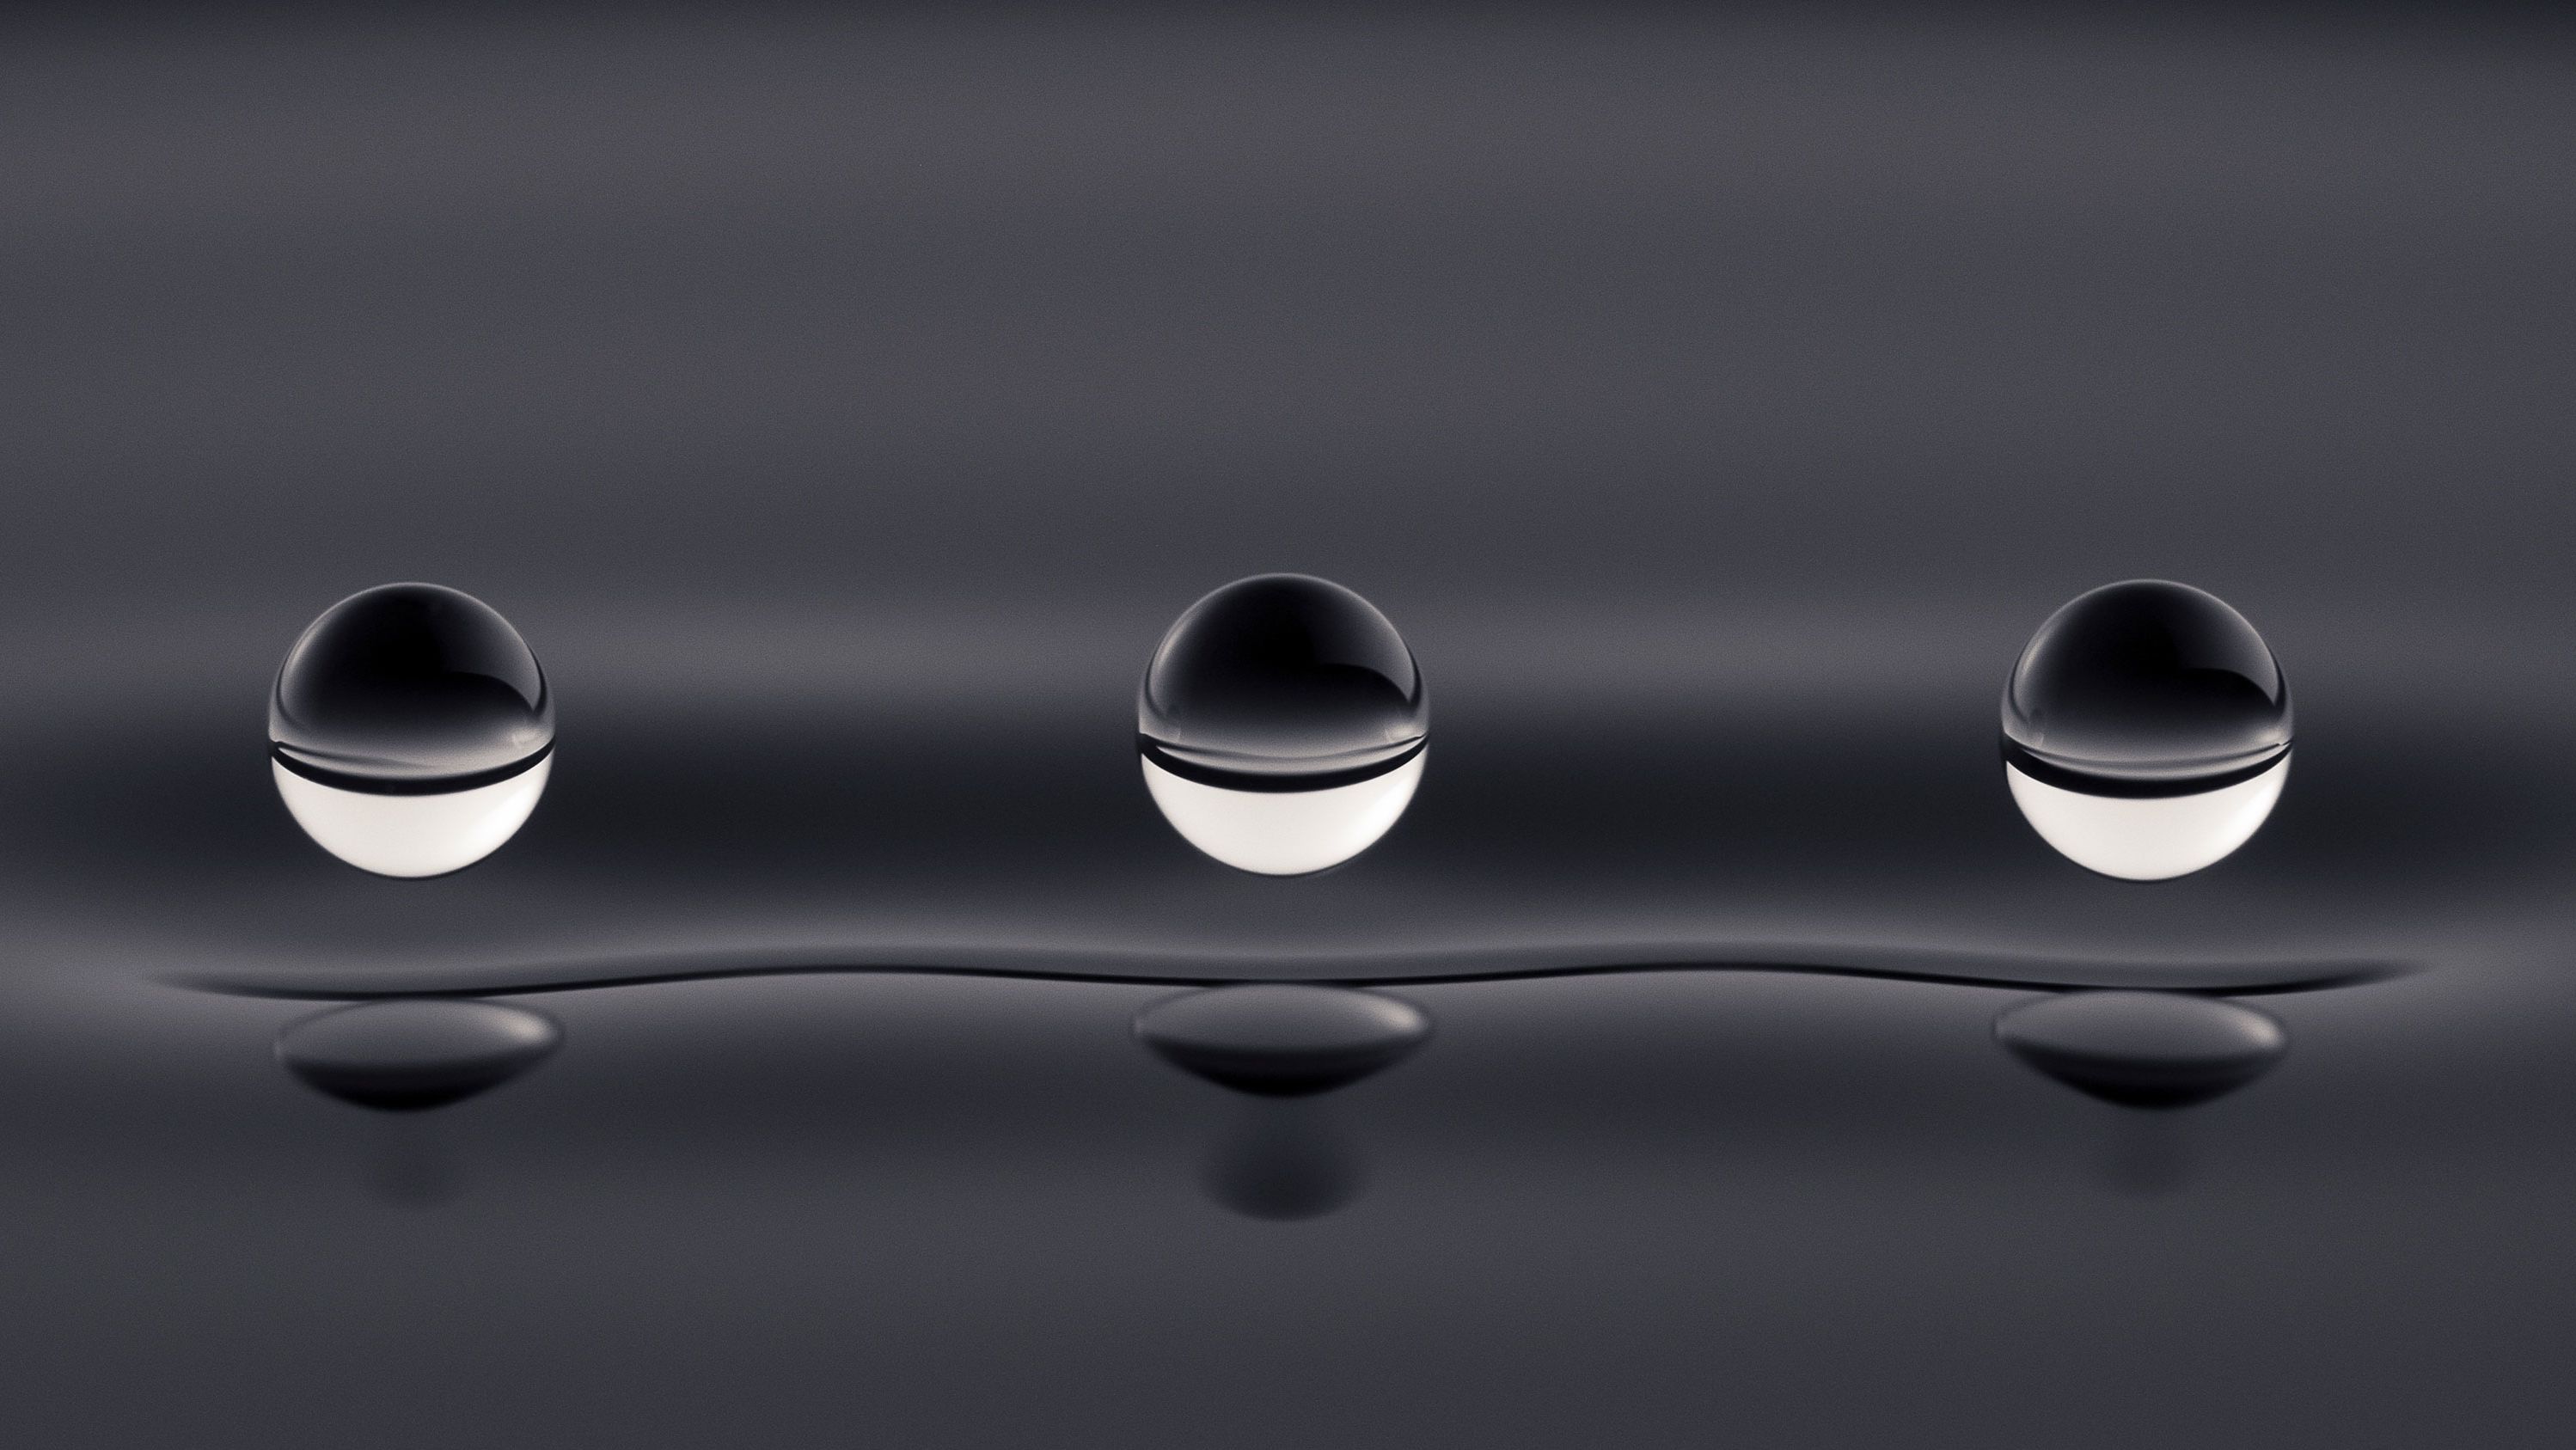 Dr. Aleks Labuda's "Quantum Droplets" was crowned the winner of the Royal Society Publishing Photography Competition.